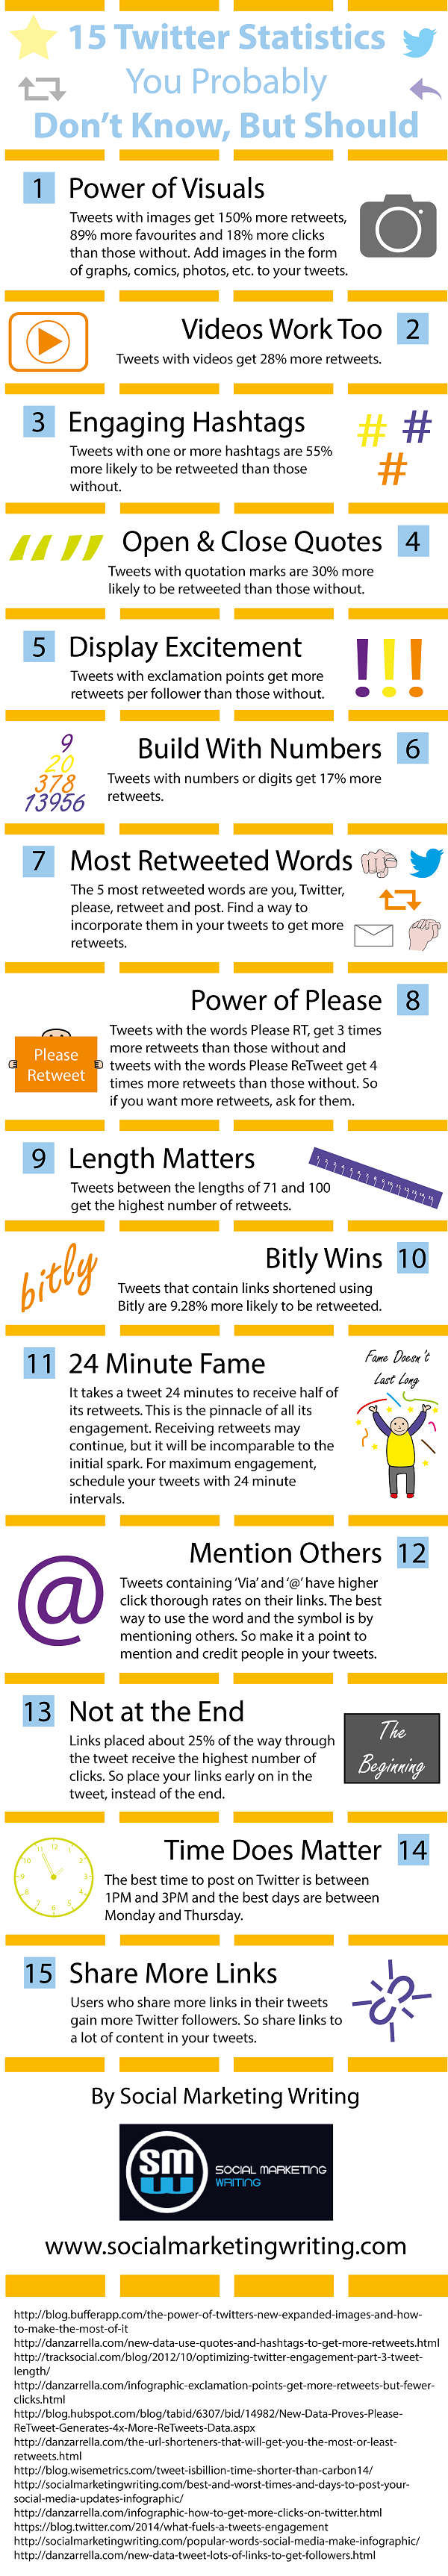 15 Twitter Statistics You Probably Don’t Know But Should Infographic